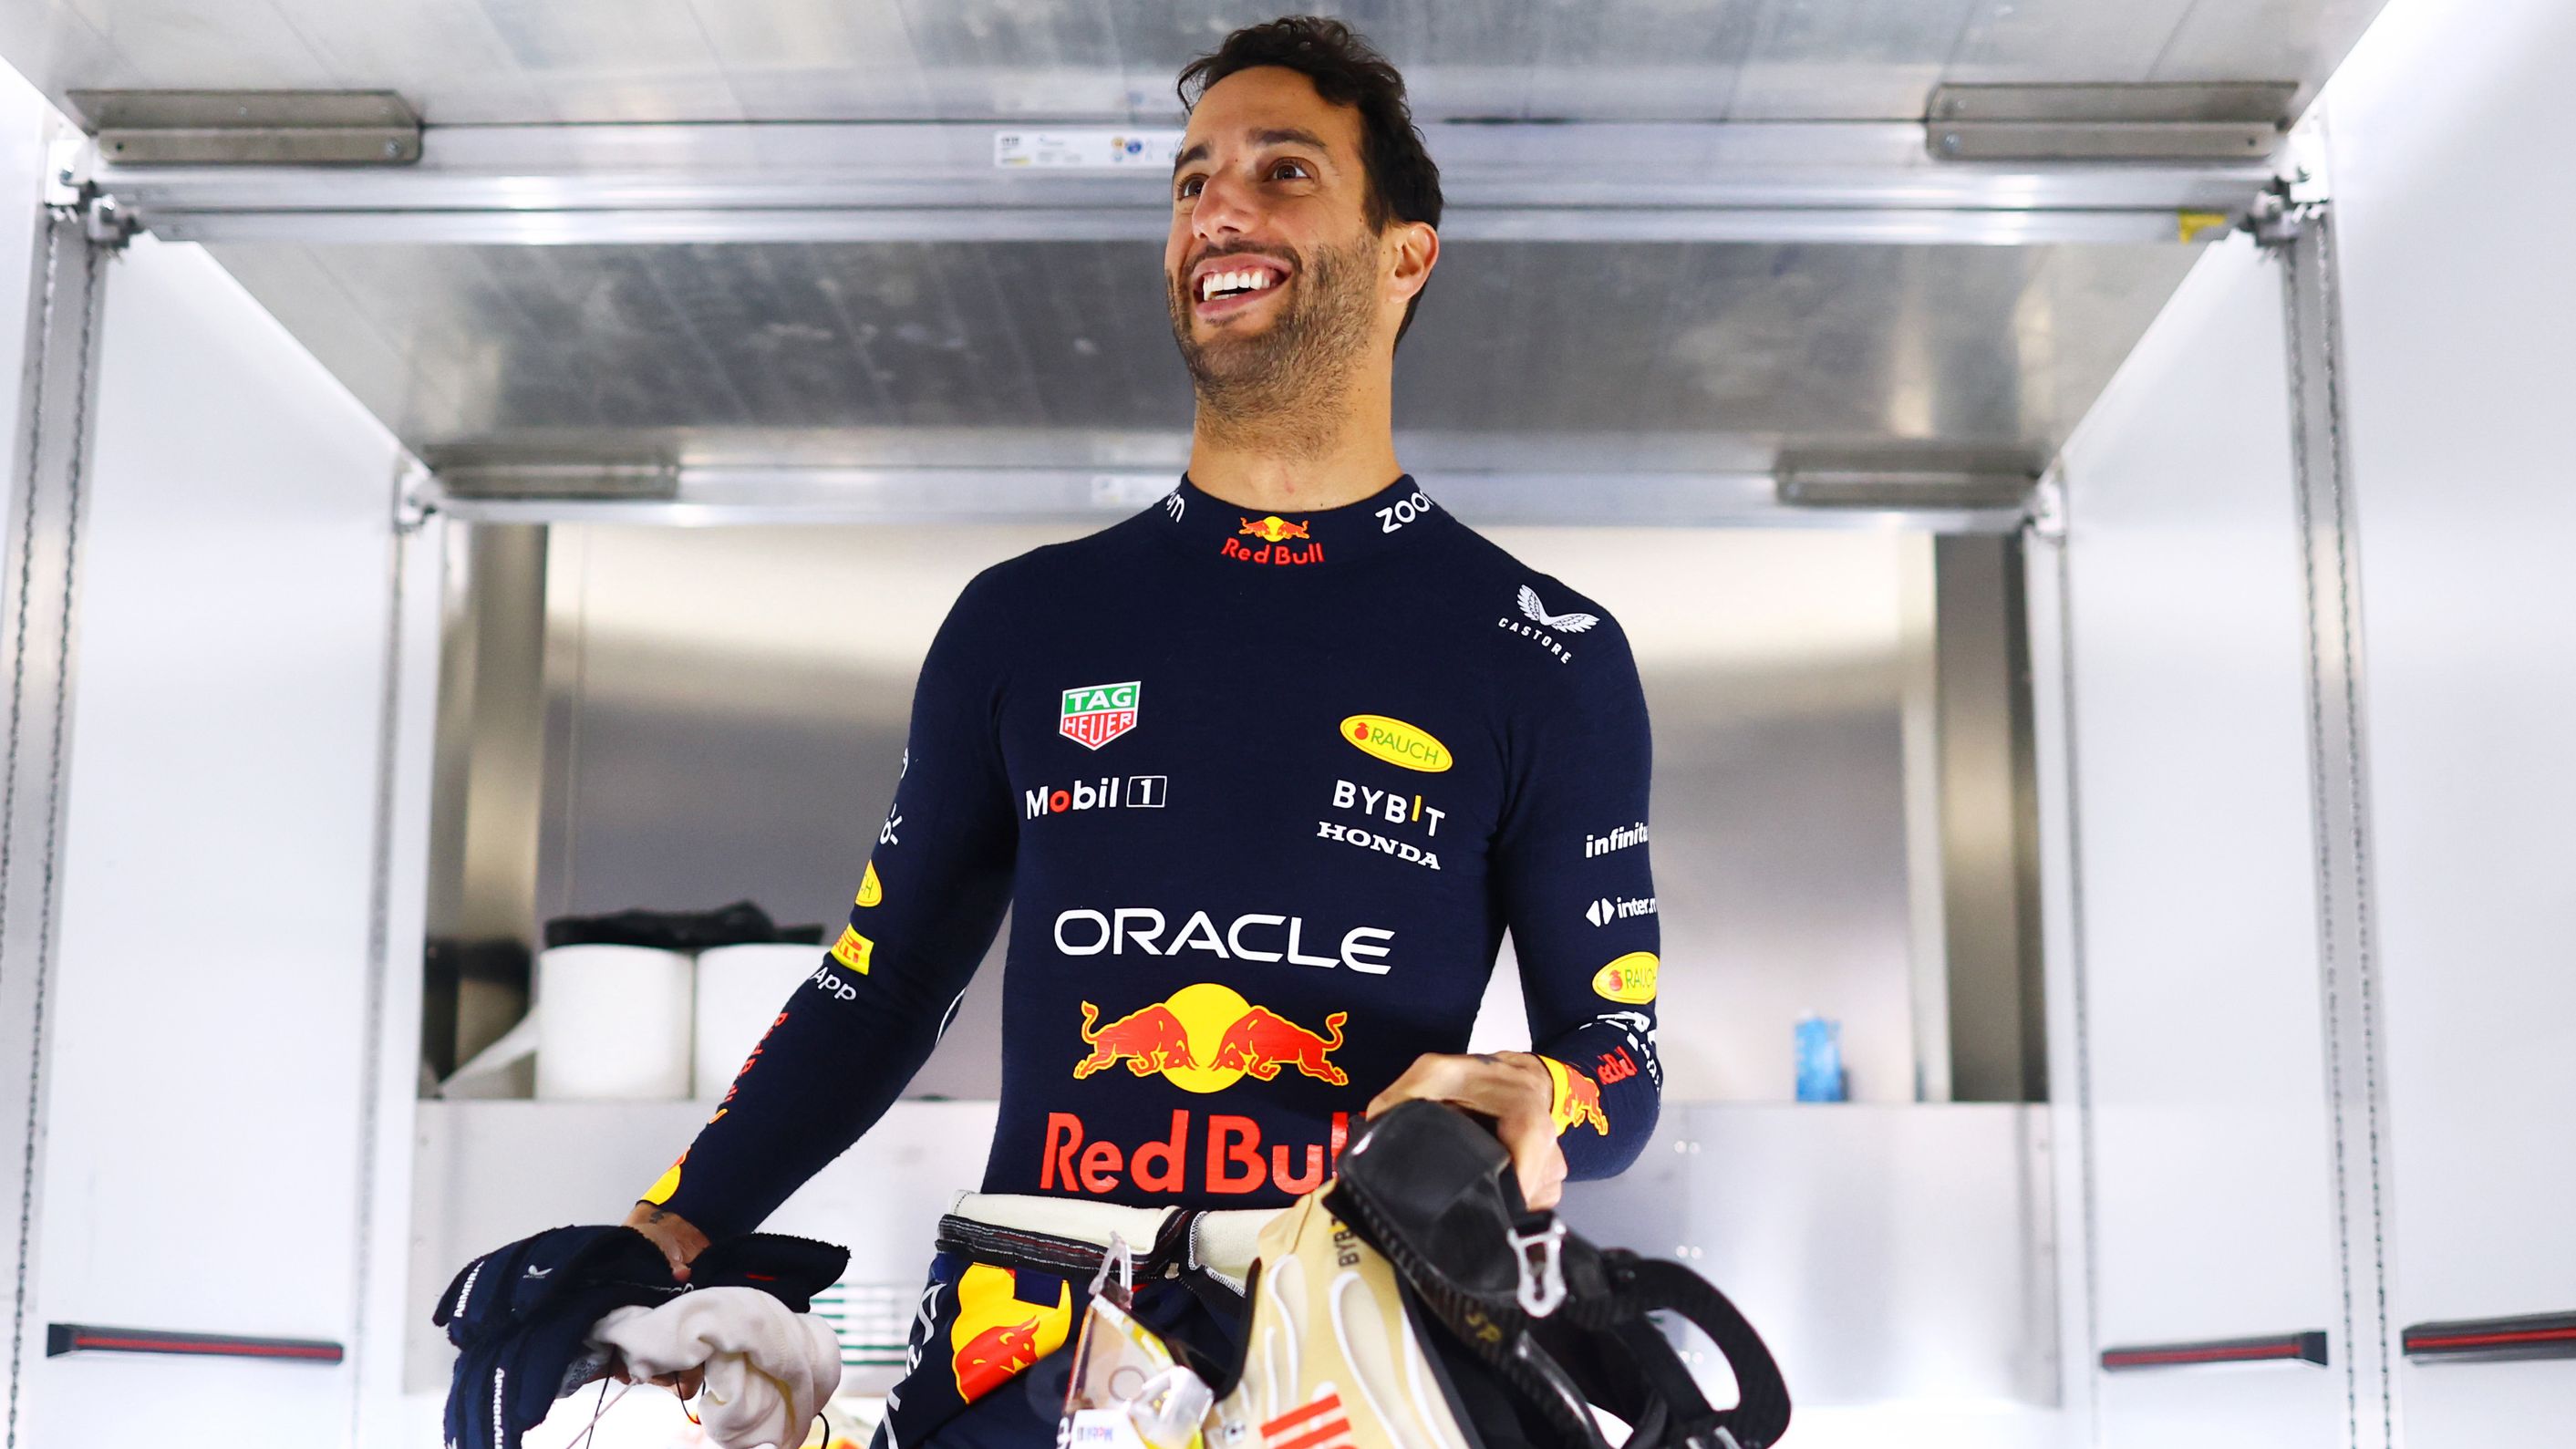 Horner opens up on whether Ricciardo could return to a Red Bull race seat  in the future